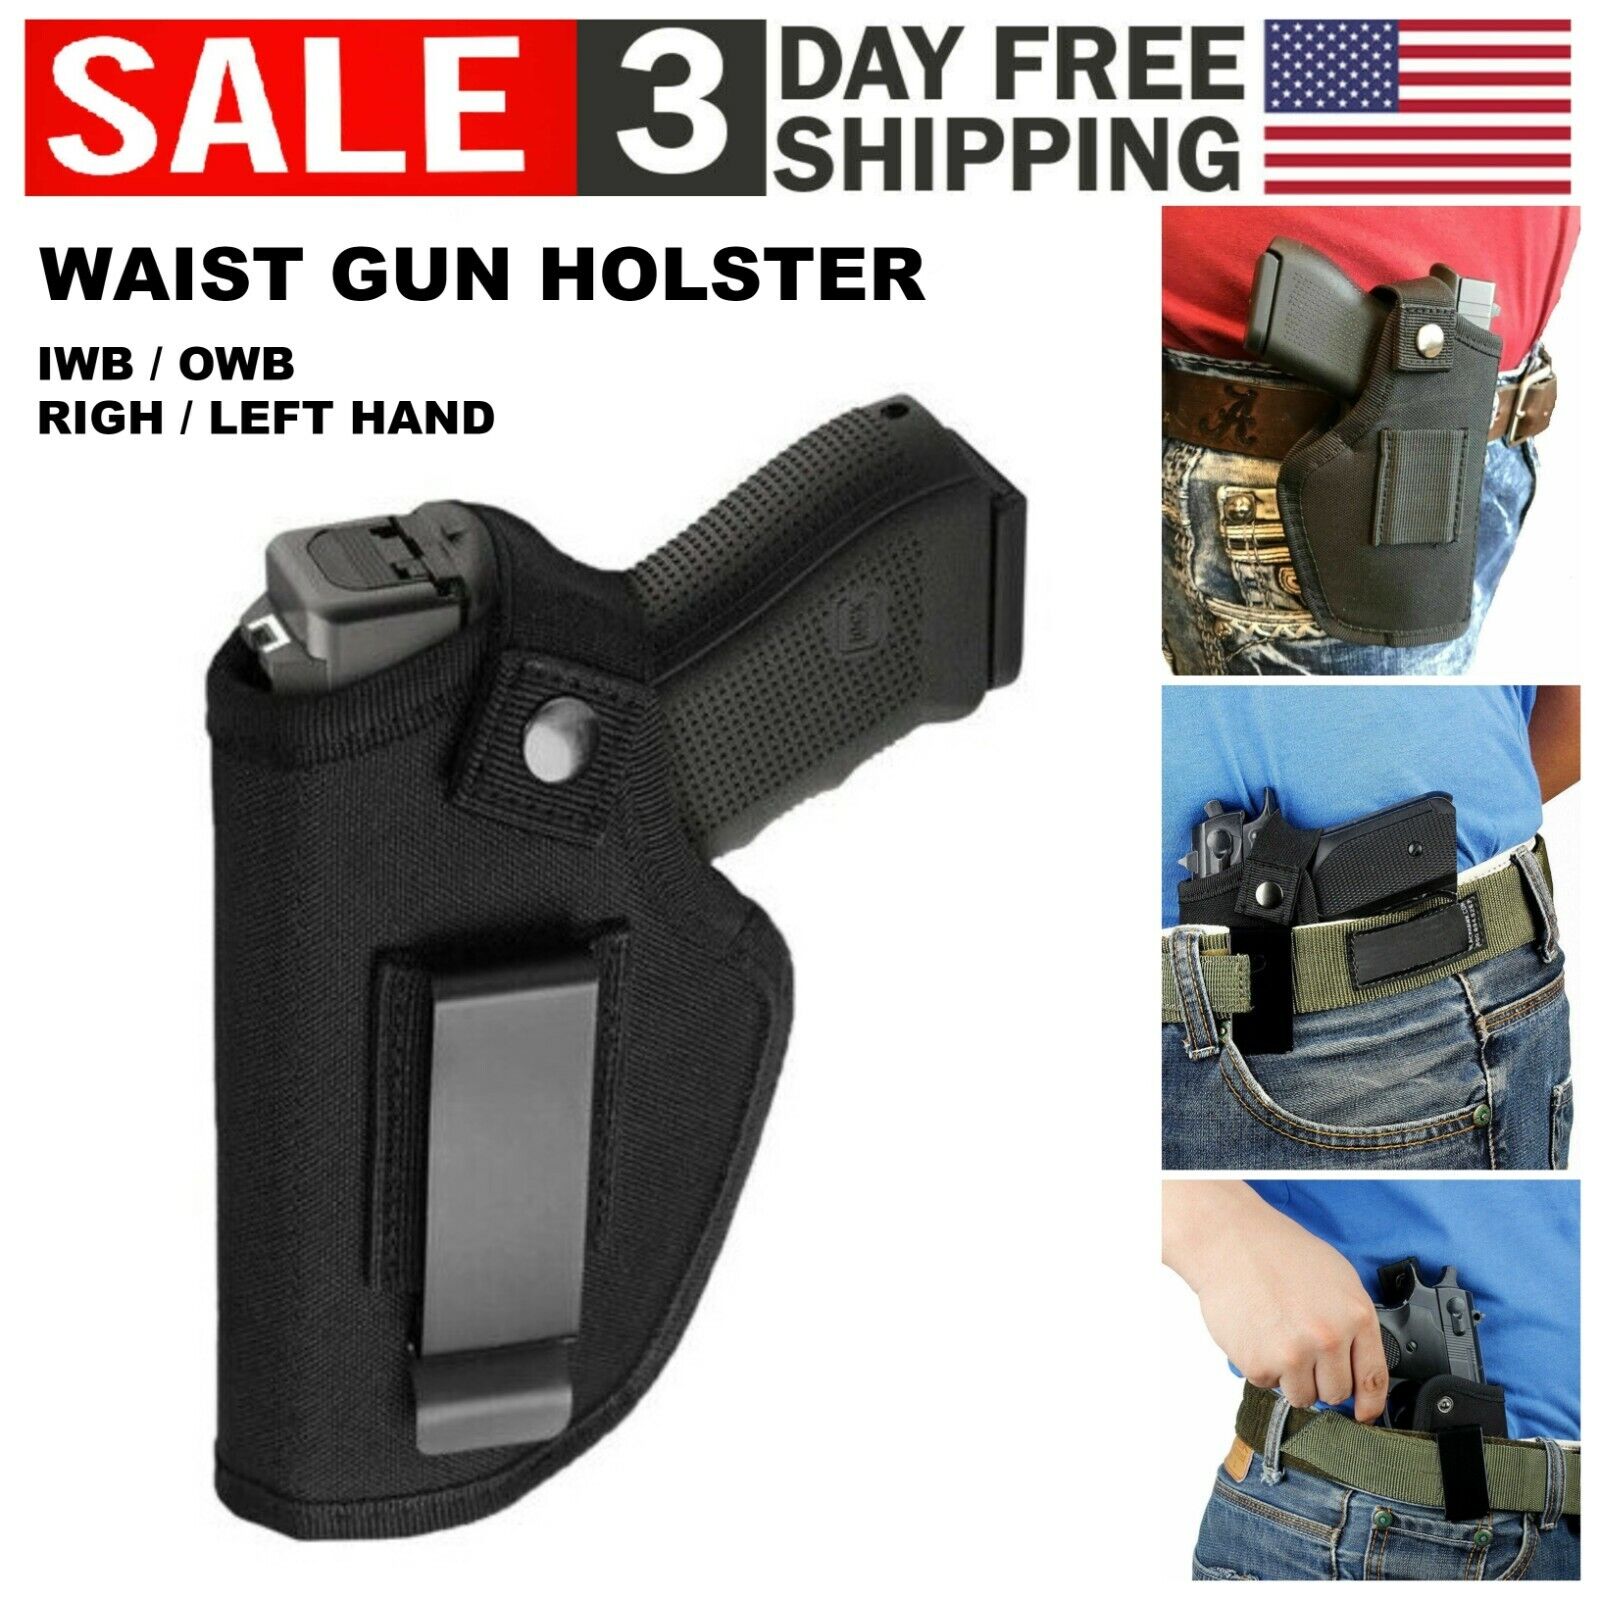 Universal IWB OWB Waist Gun Holster Concealed Carry Right/Left Hand Quick Draw